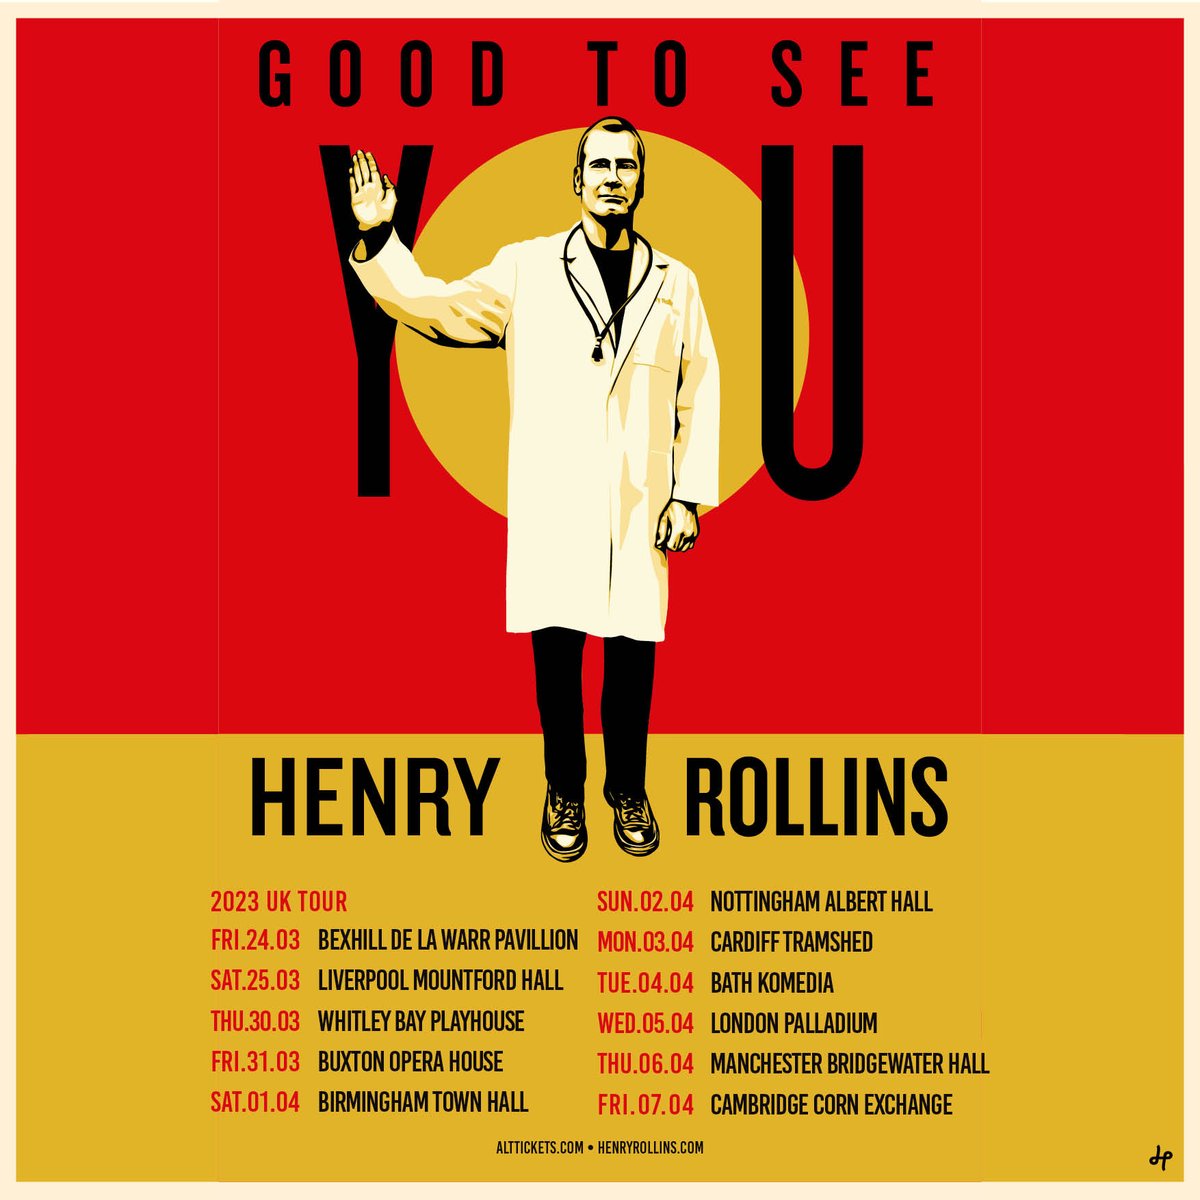 NEW: Punk Rock icon, Spoken word poet, Actor, Author and DJ @henryrollins is returning to the UK next Spring on his Good To See You 2023 tour! Tickets go on sale Thurs 10am Set an event reminder: bit.ly/3TTqRO6